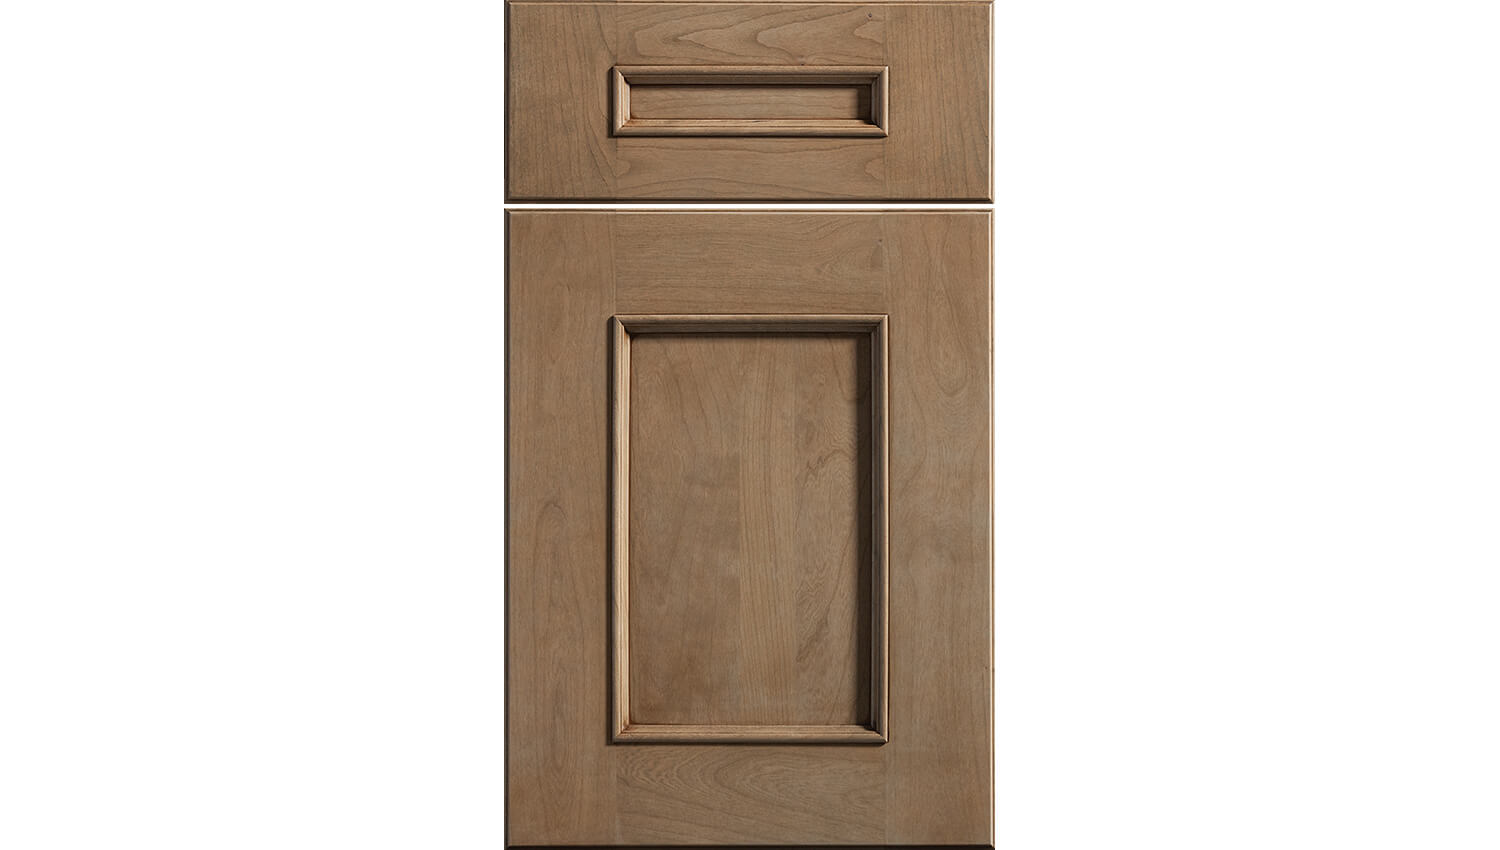 Middleton is a sleek flat panel door style from Dura Supreme with true-brown stain and a warm coffee glazed finish.